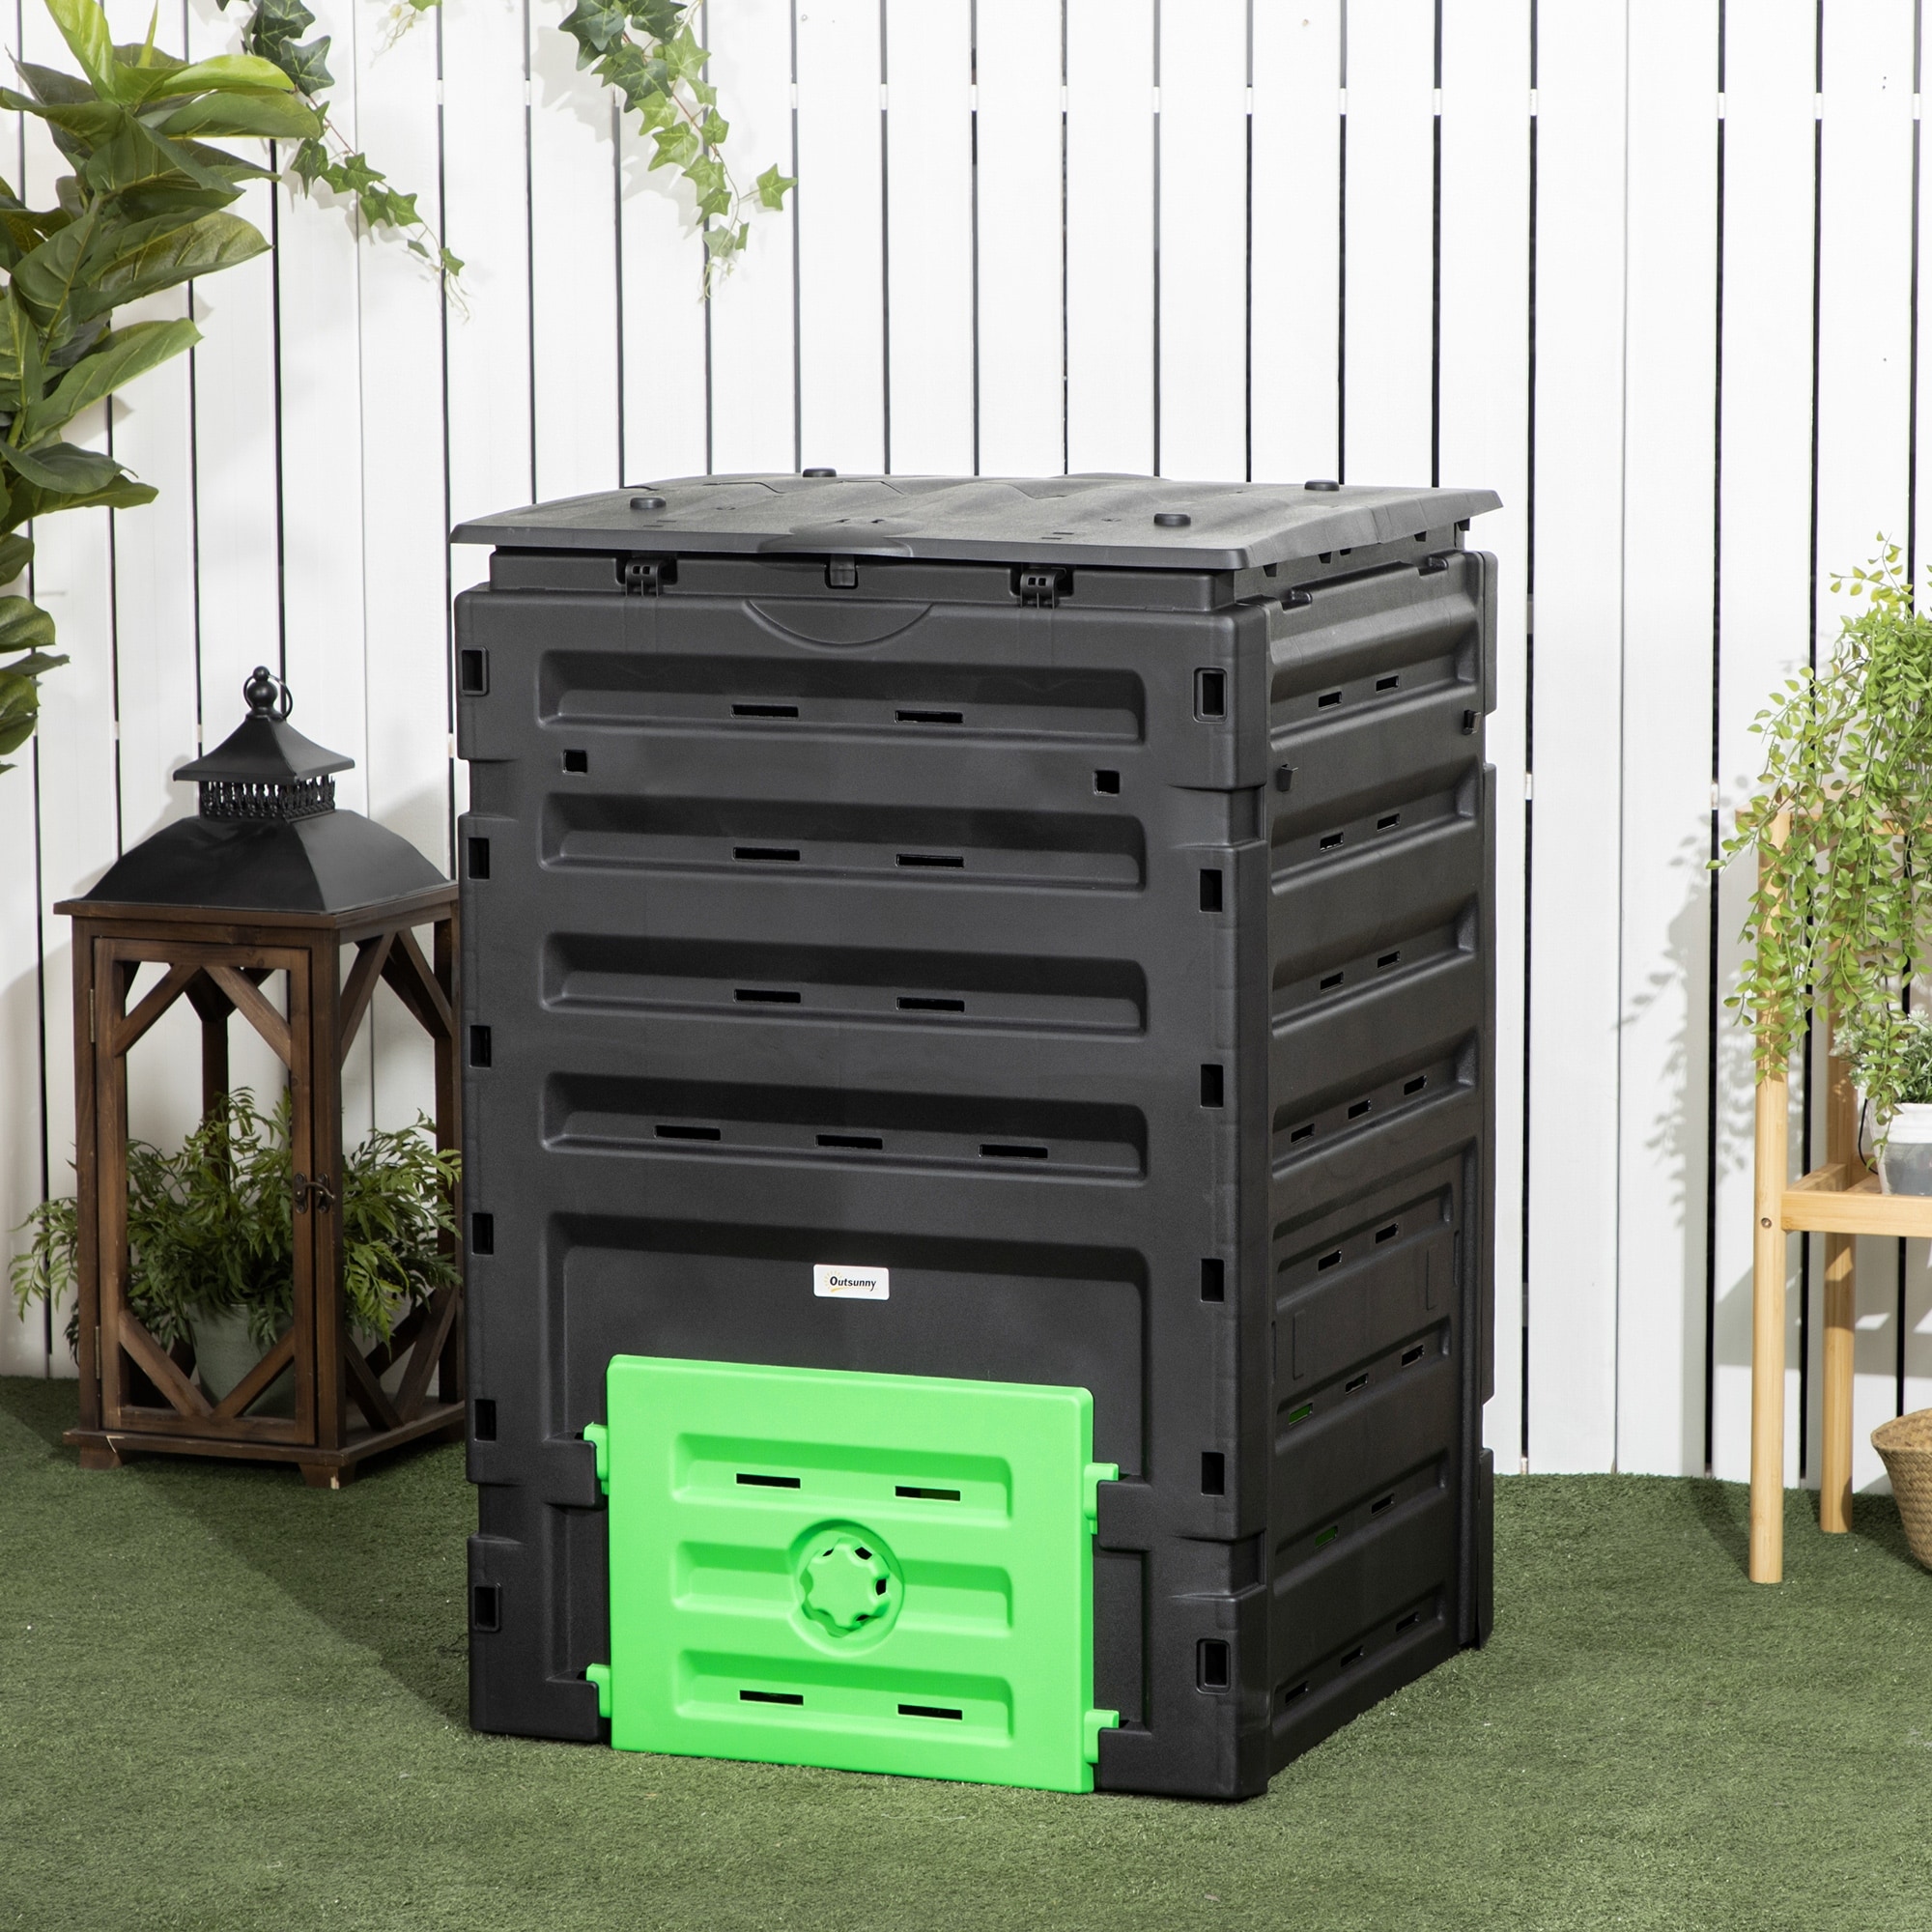 https://ak1.ostkcdn.com/images/products/is/images/direct/7c617b4a84119301cfa44e3b4940a9cb5c7a42dc/Outsunny-Garden-Compost-Bin%2C-120-Gallon-%28450L%29-Garden-Composter-with-80-Vents-and-2-Sliding-Doors%2C-Lightweight-%26-Sturdy.jpg